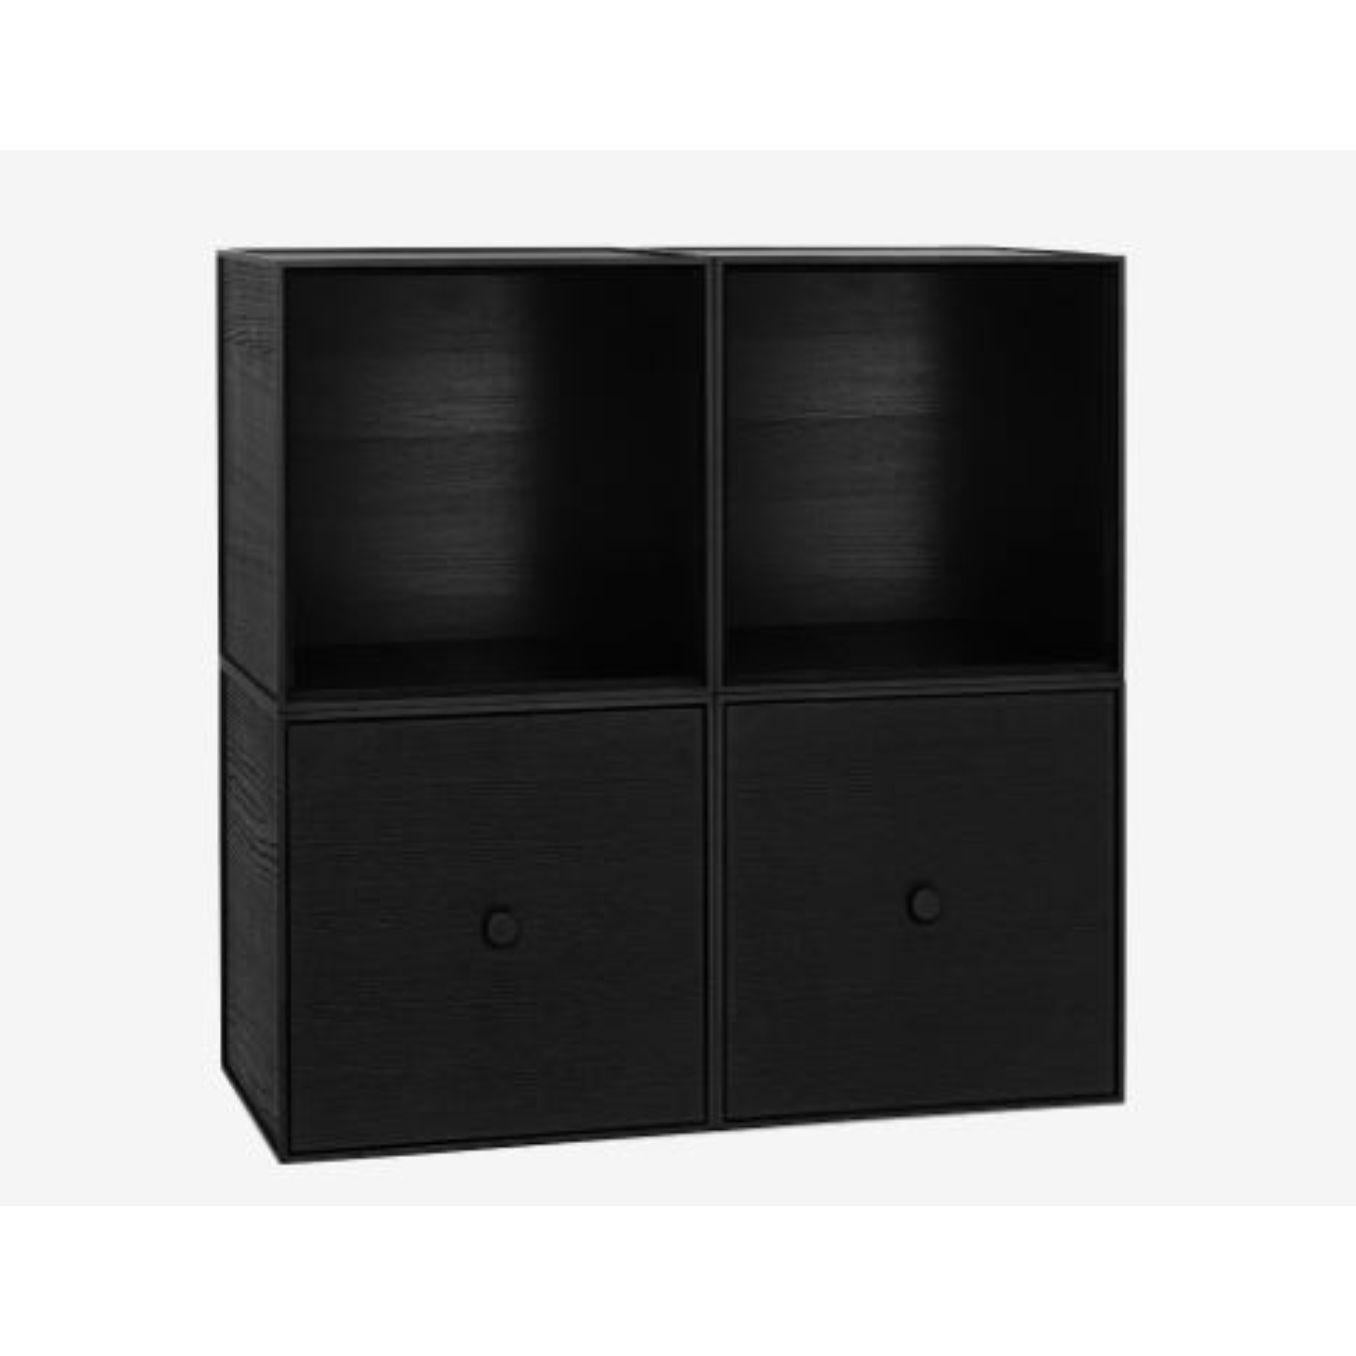 35 black ash frame square standard box by Lassen.
Dimensions: D 70 x W 35 x H 70 cm. 
Materials: Finér, Melamin, Melamine, Metal, Veneer, Ash.
Also available in different colours and dimensions. 
Weight: 23.74 Kg

By Lassen is a Danish design